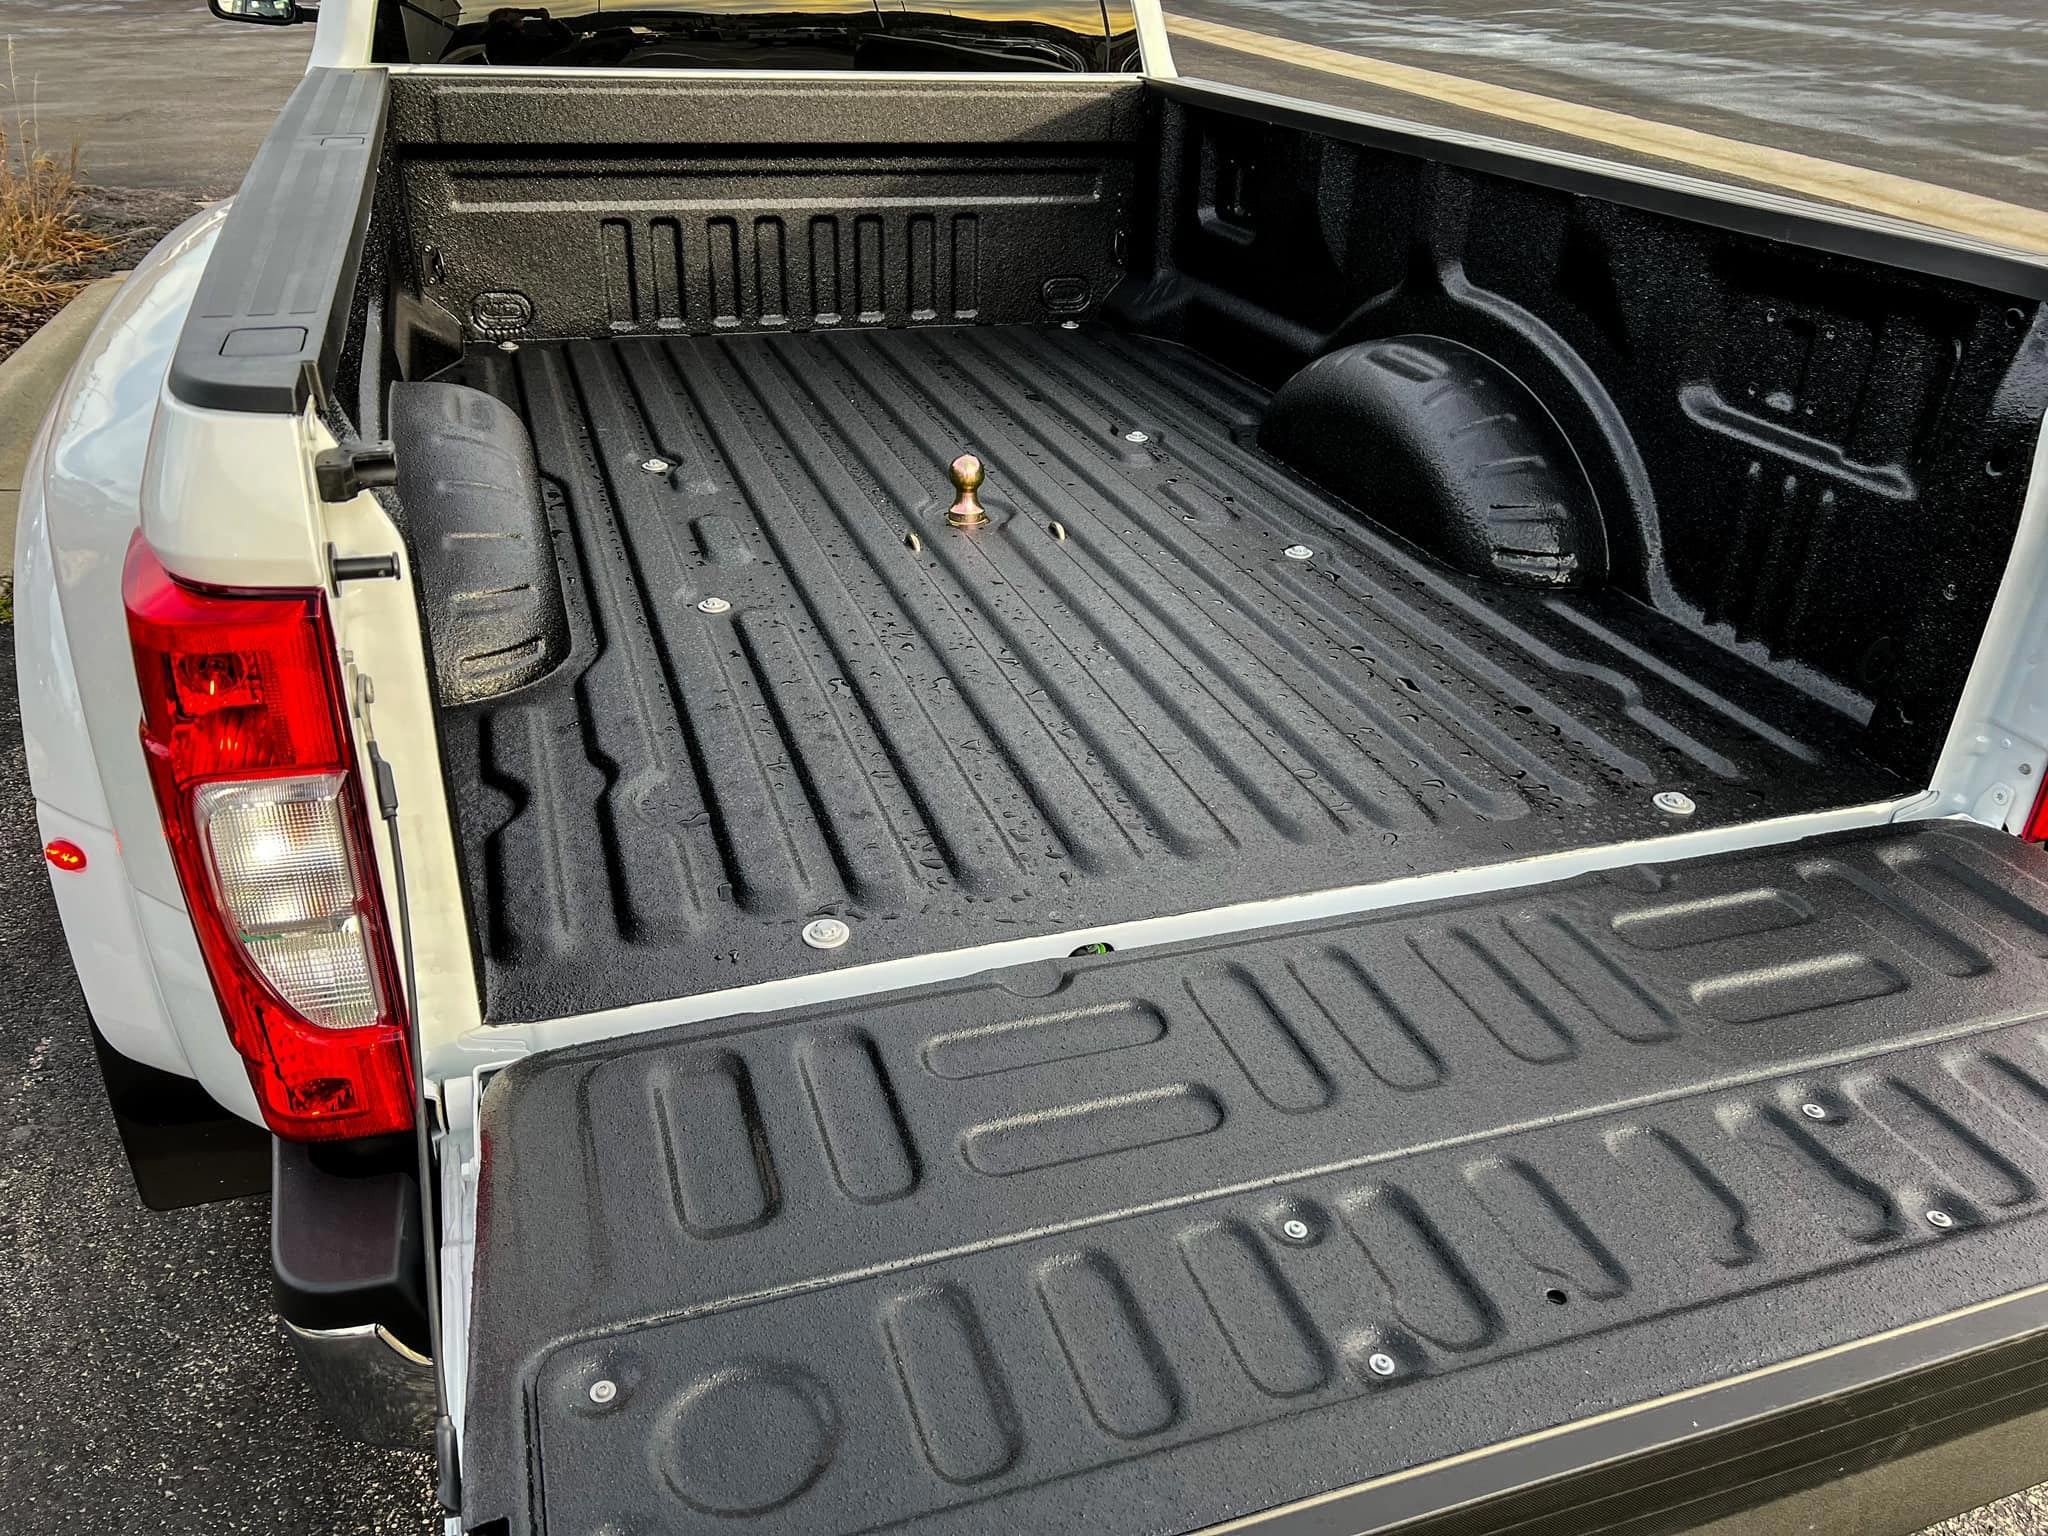 Spray on Truck Bed Liners, ArmorThane